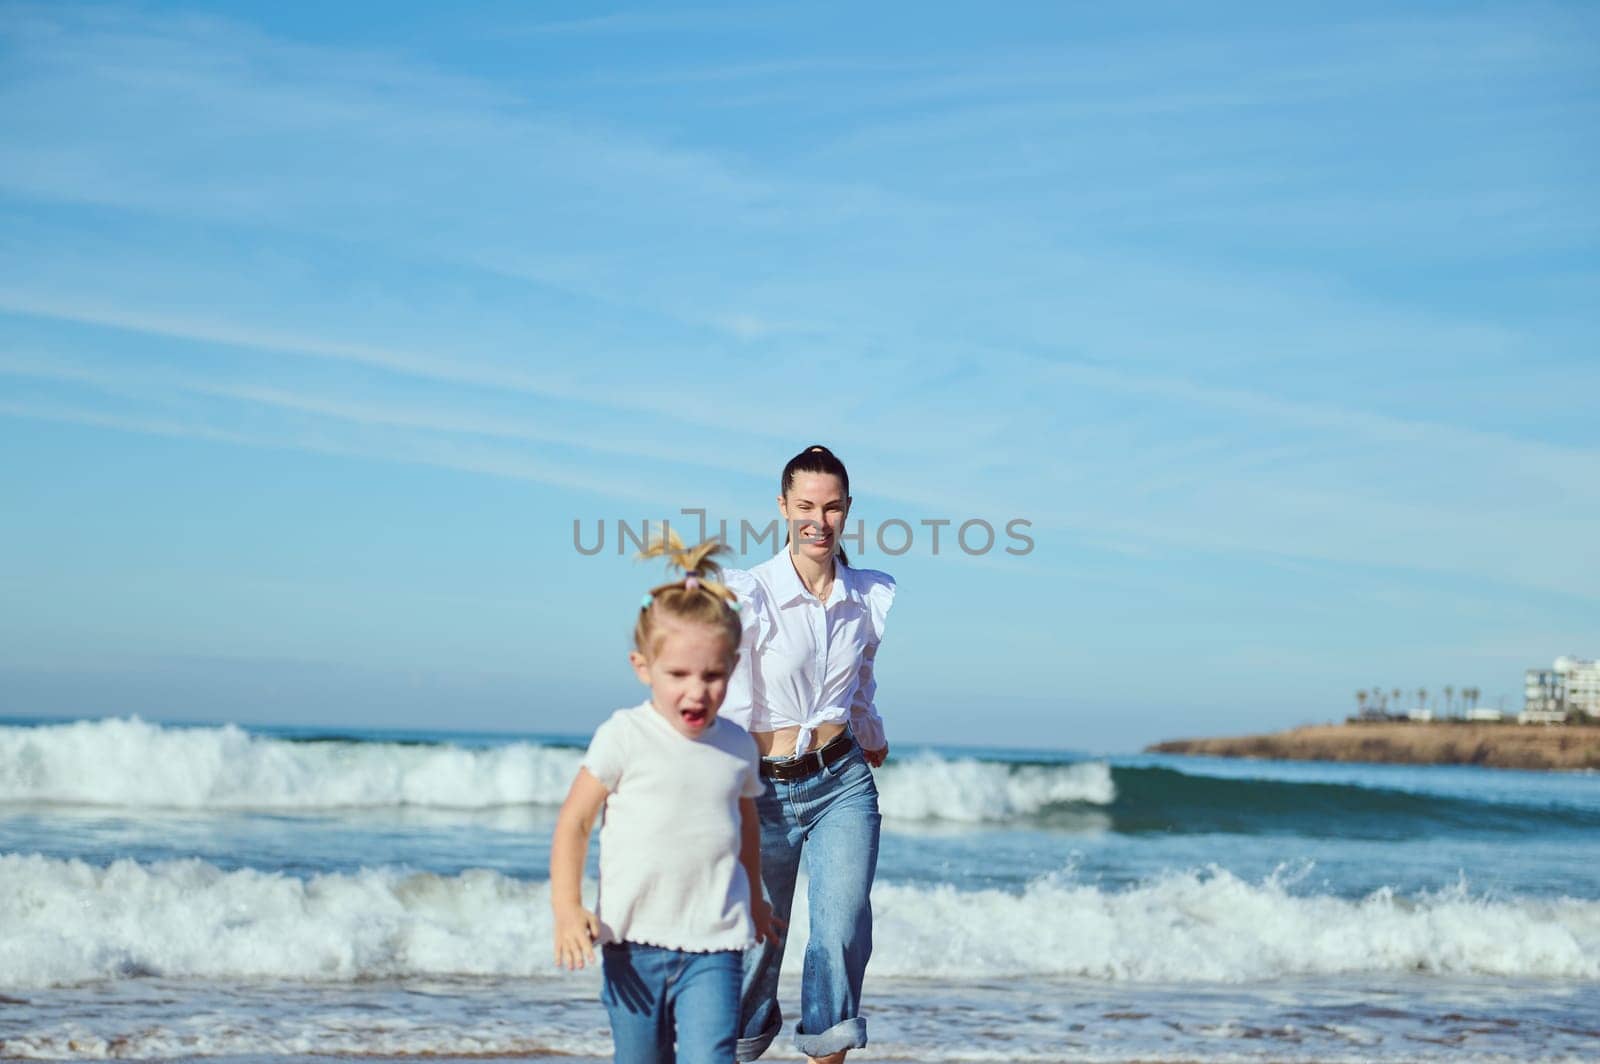 Young mother and little daughter playing together, running along a tropical beach, playing with waves crashing on the shore, enjoying happy time together. Family relationships. Carefree childhood